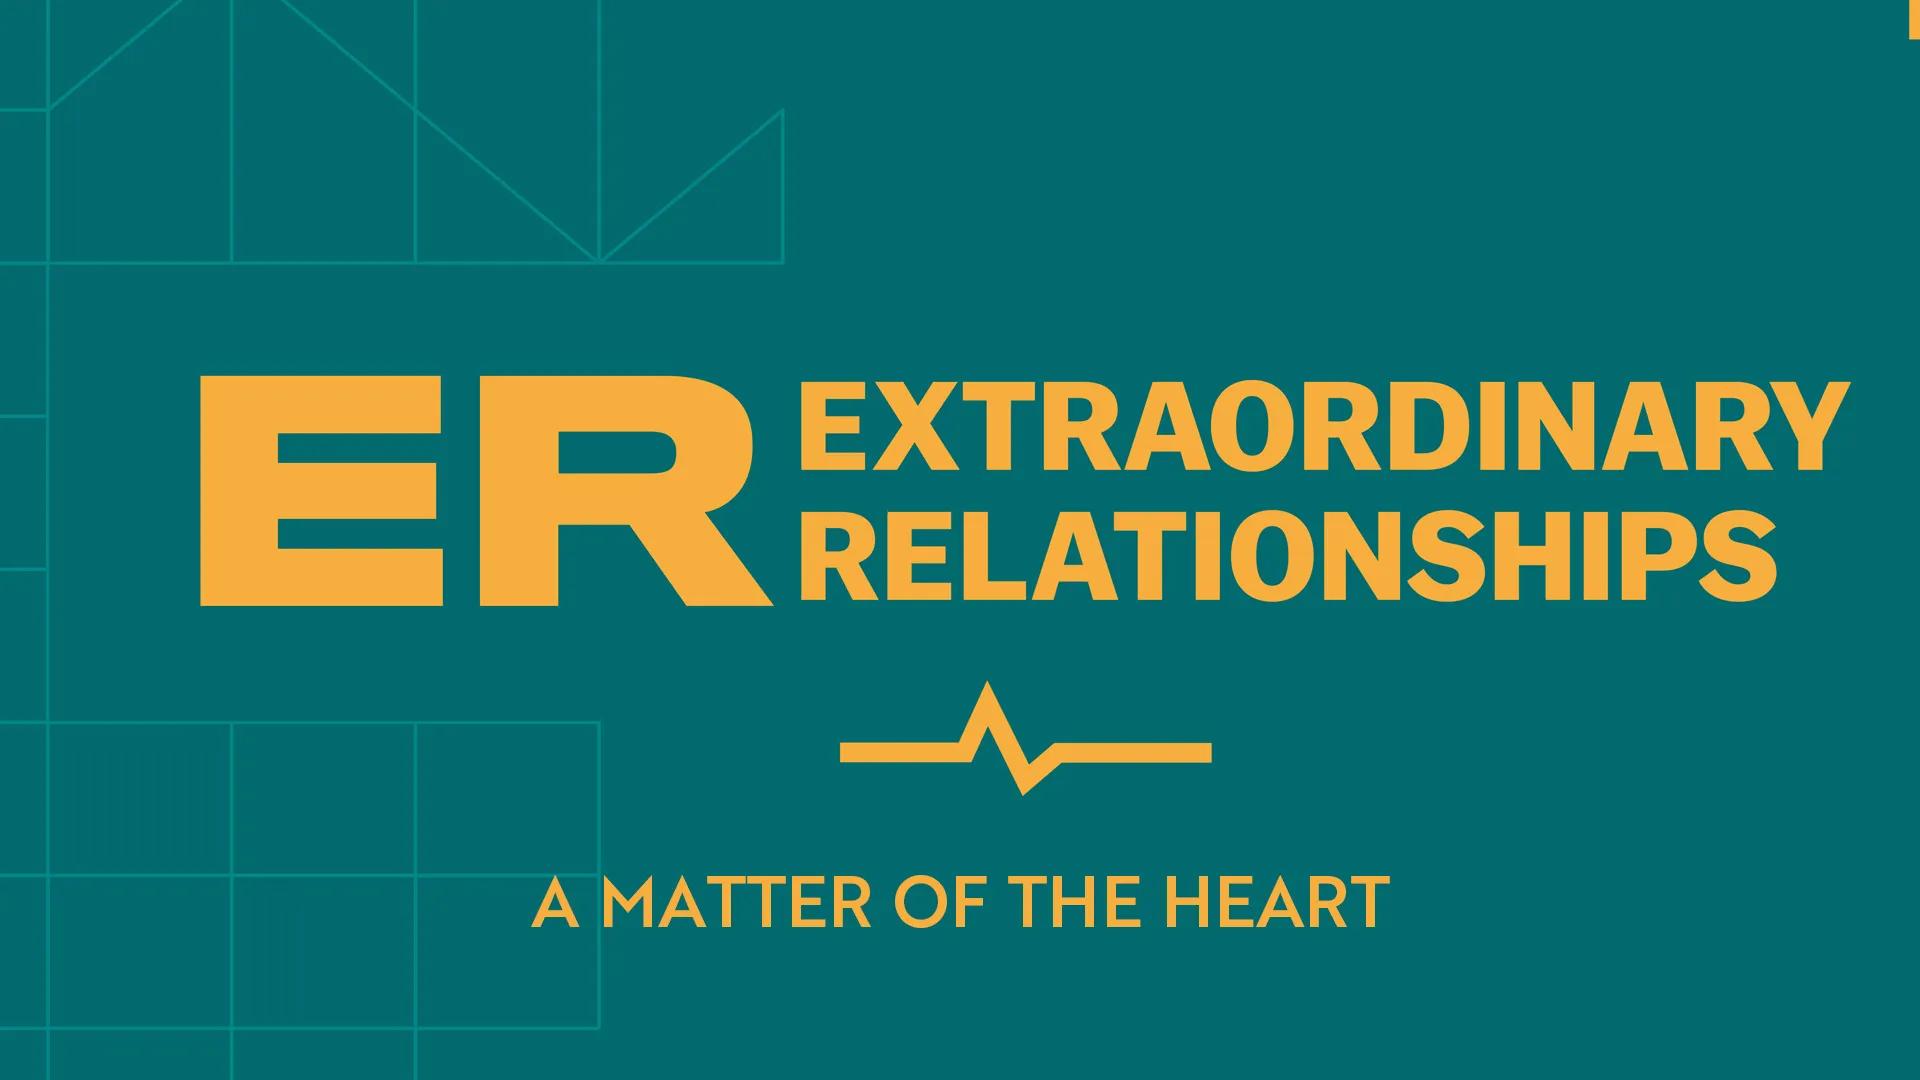 A teal background with yellow words that say "extraordinary relationship" and "a matter of the heart"